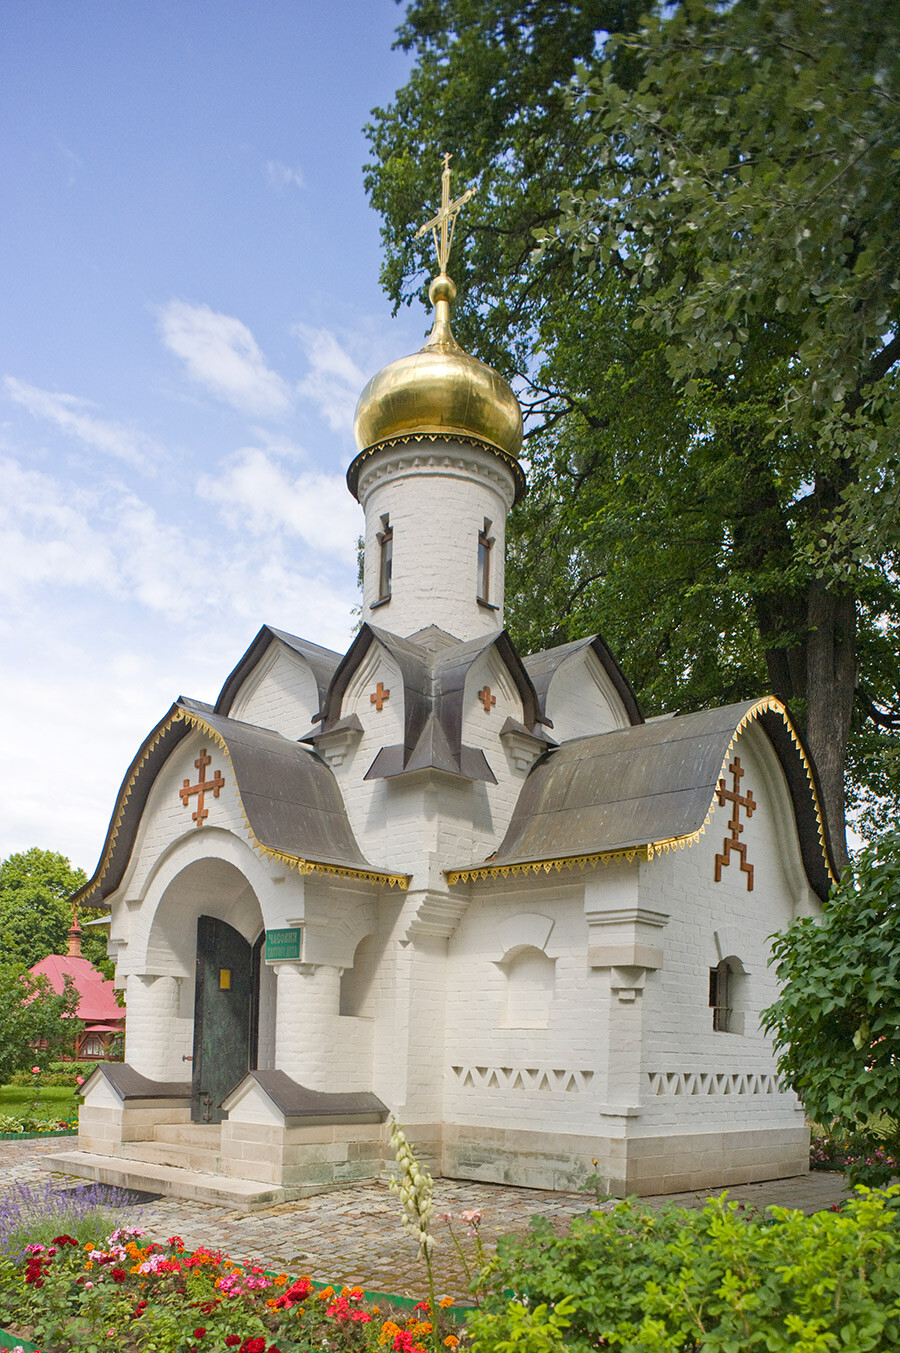 Monastery of Sts. Boris & Gleb, Chapel of Descent of the Holy Spirit. A fine example of Neo-Russian style, built 2004 as monument to 850 years of Dmitrov. Southwest view. July 18, 2015